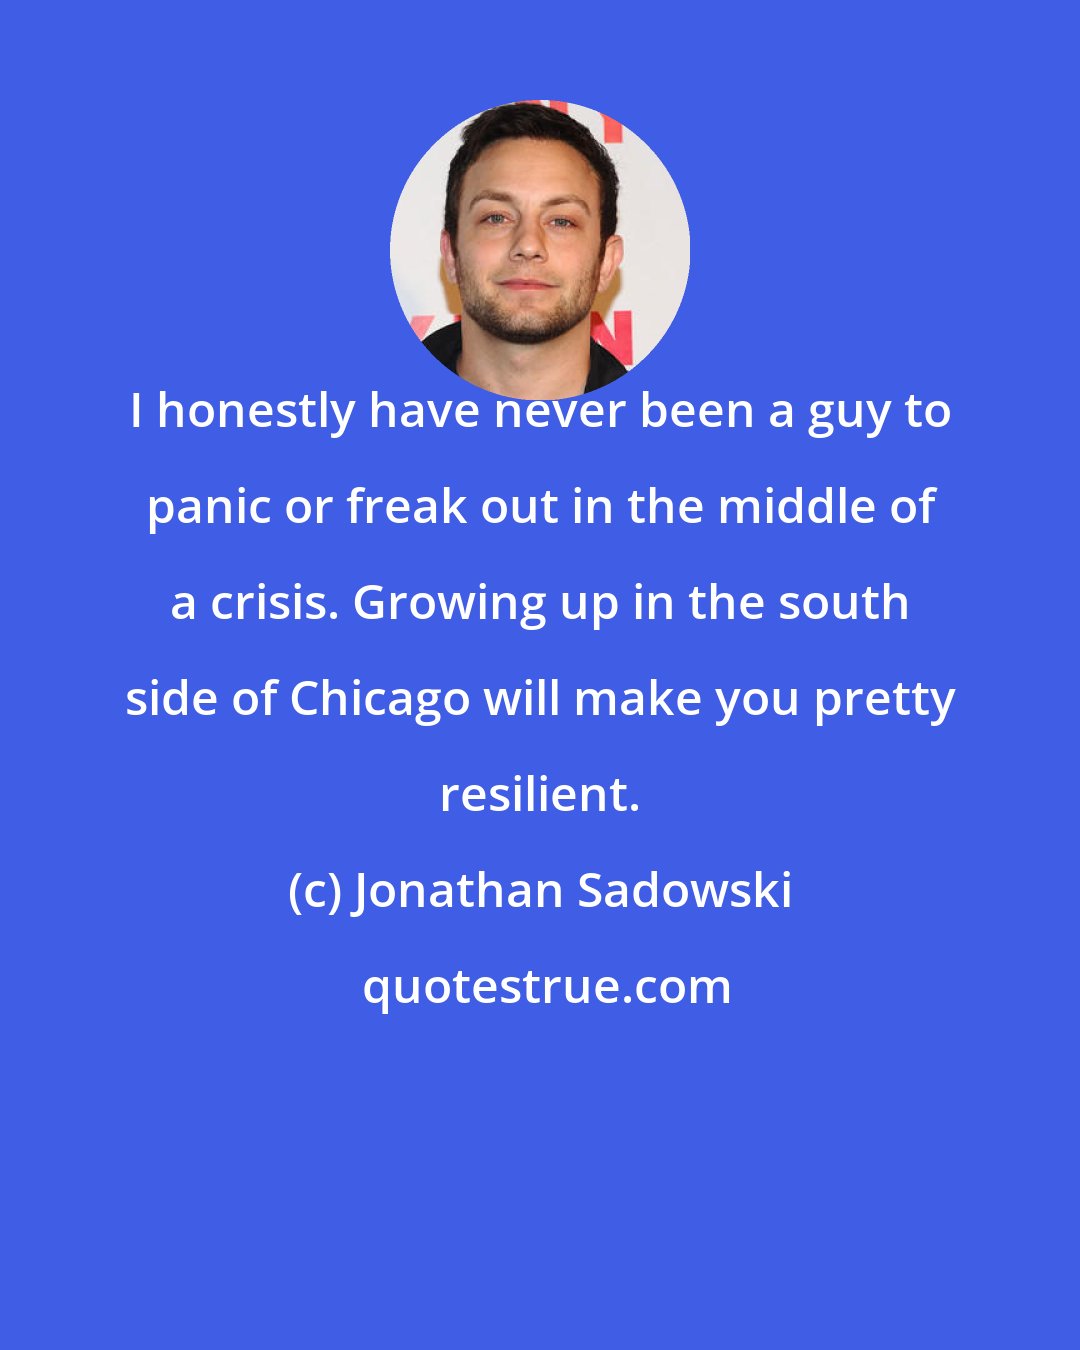 Jonathan Sadowski: I honestly have never been a guy to panic or freak out in the middle of a crisis. Growing up in the south side of Chicago will make you pretty resilient.